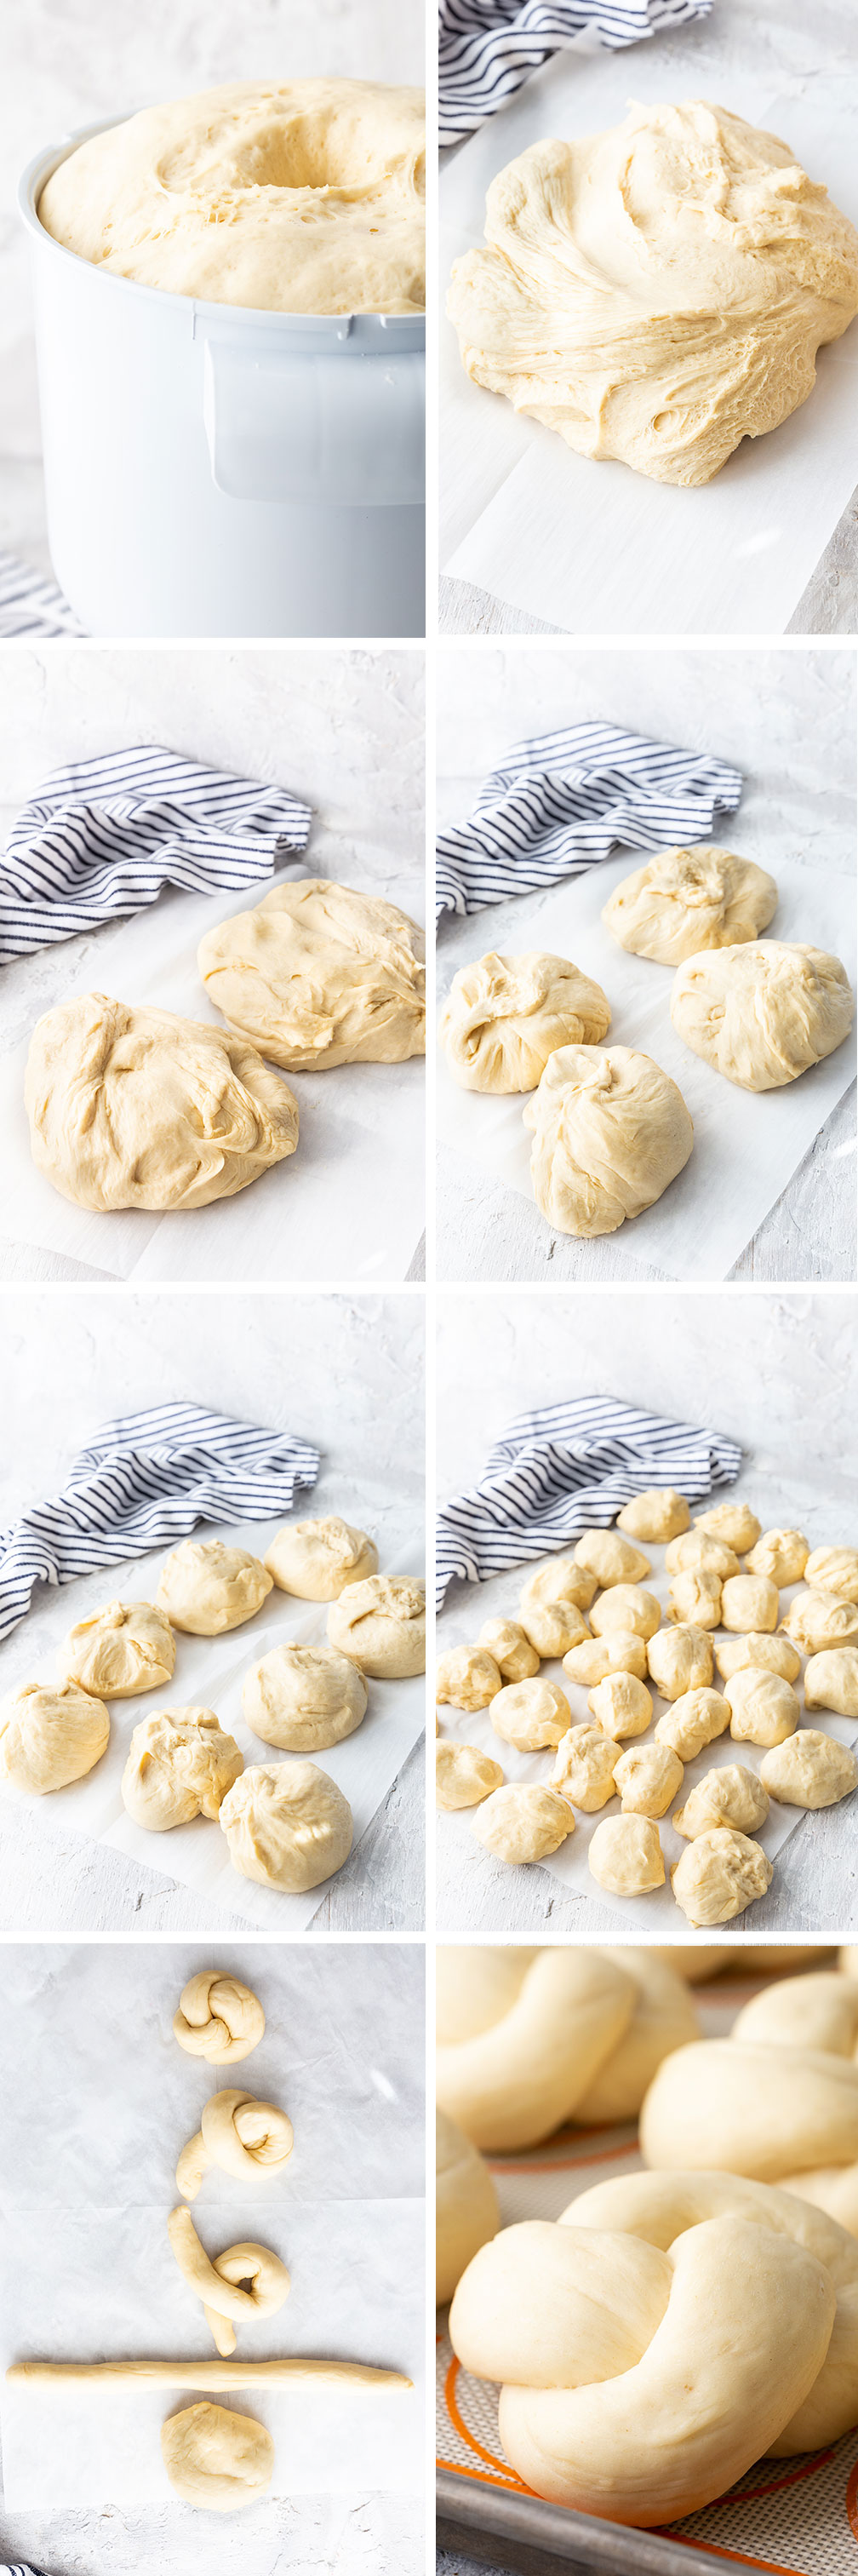 How to make the dinner rolls